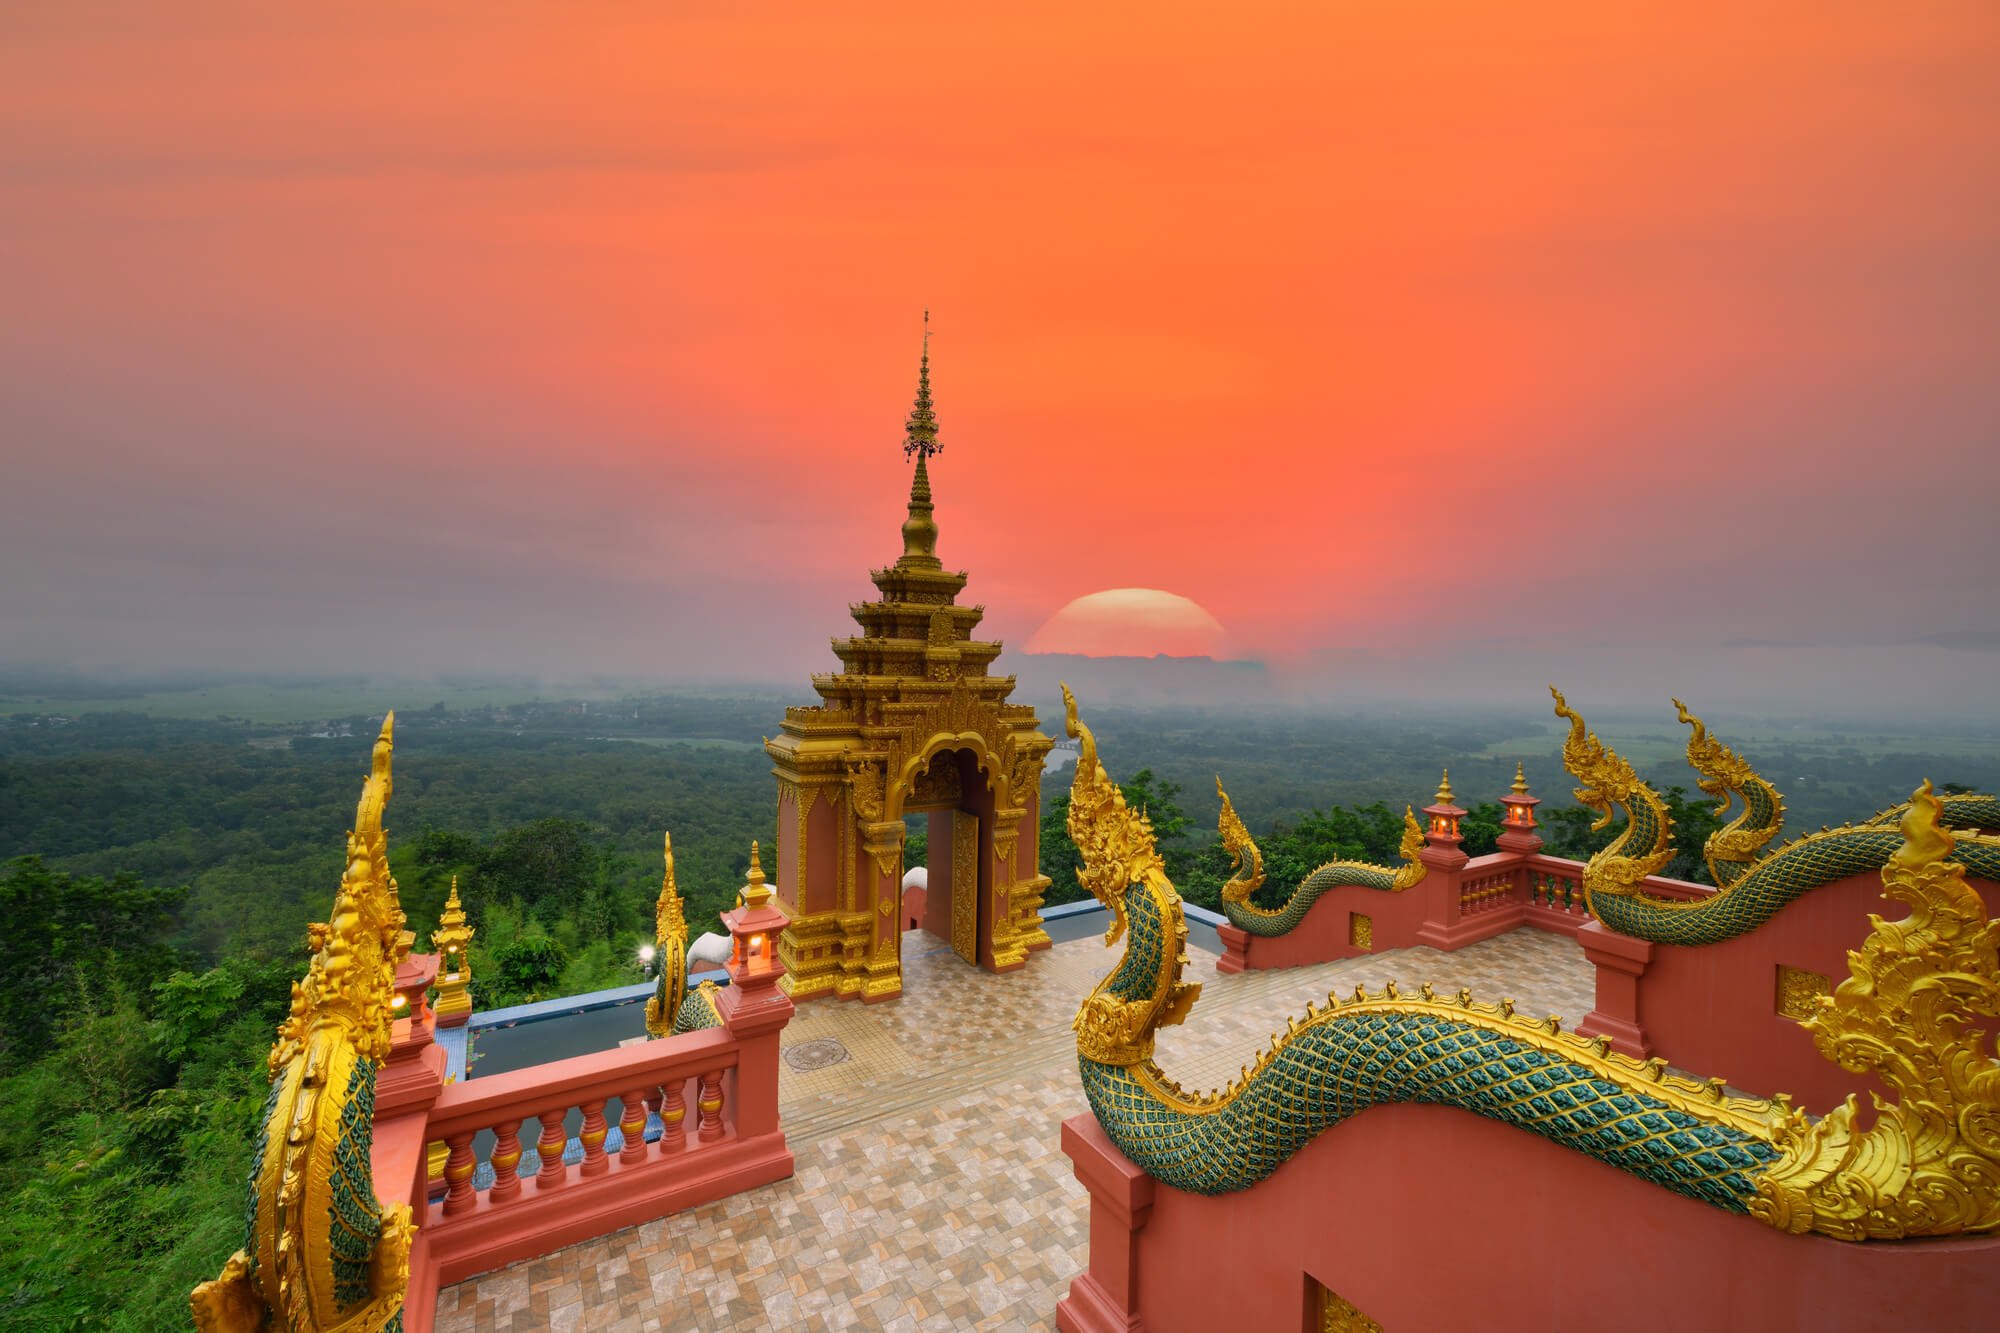 Wat Phra That Doi Phra Charn Temple at sunset